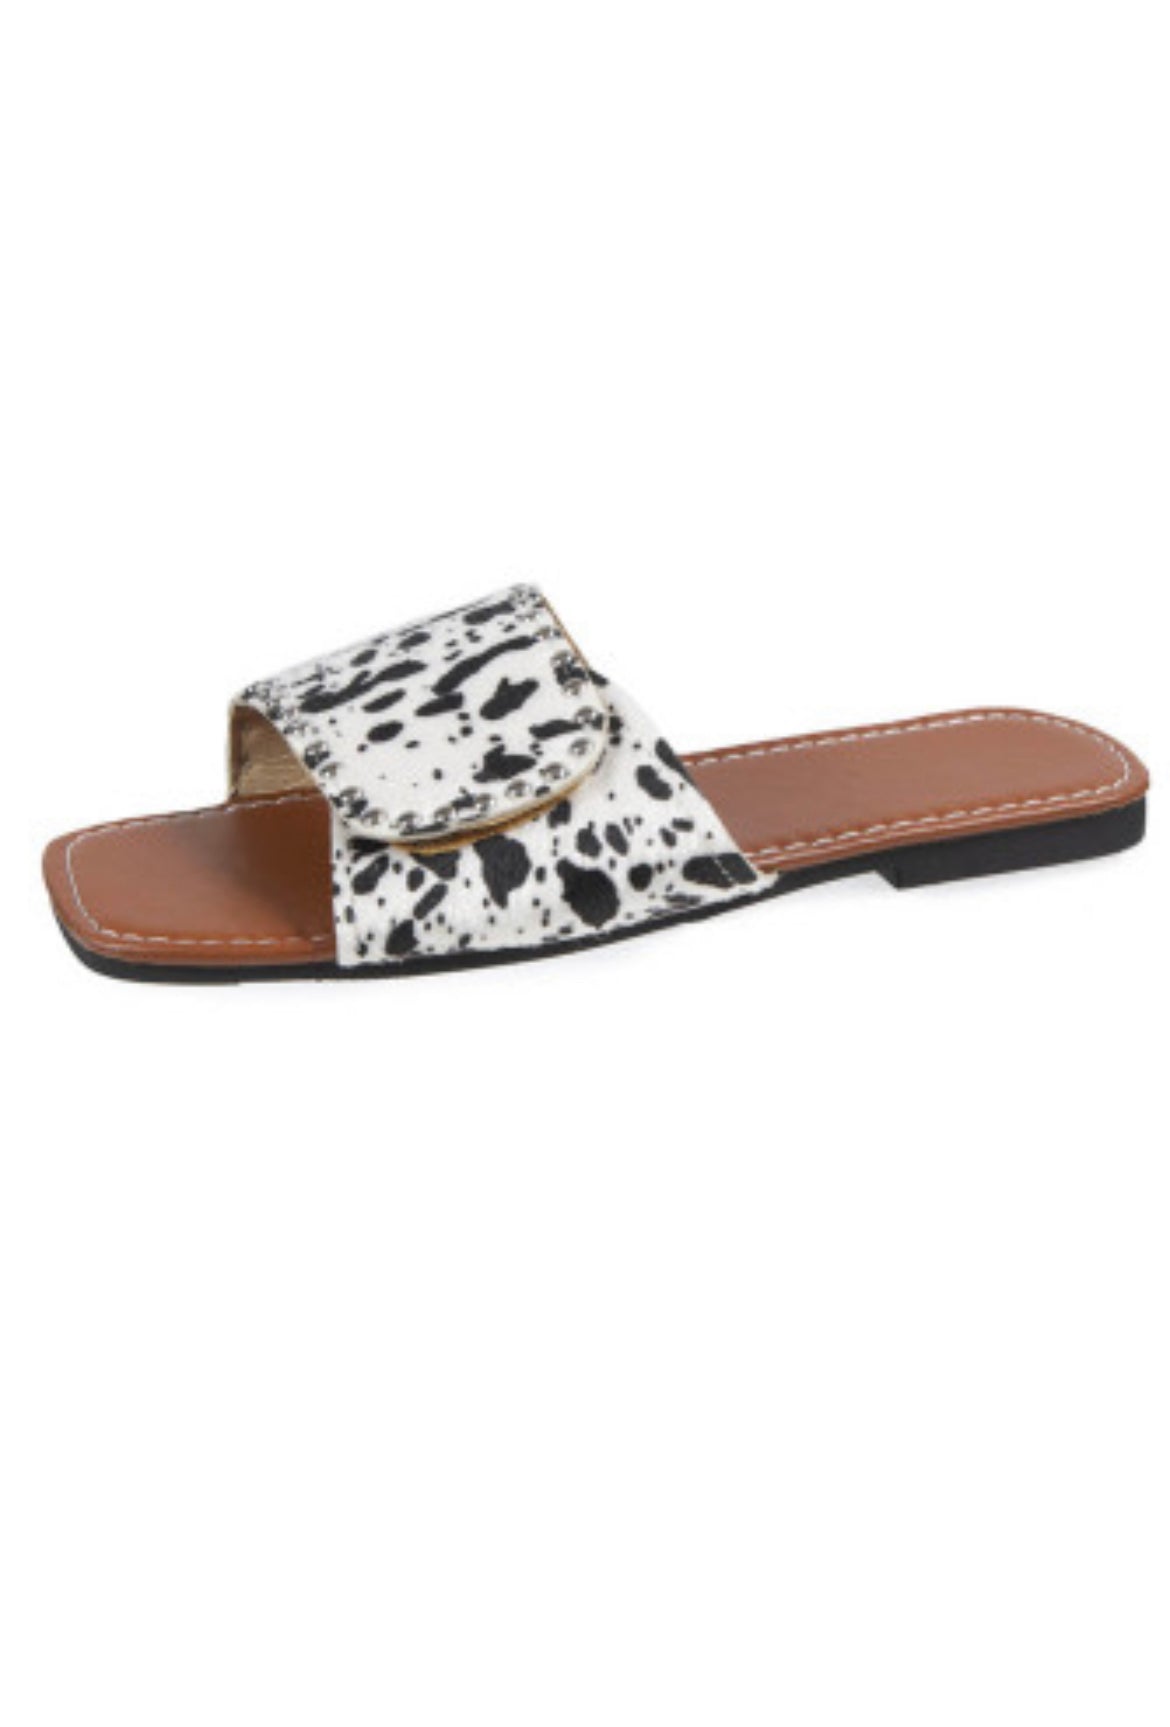 Cow Print Slides-Western Culture Leather